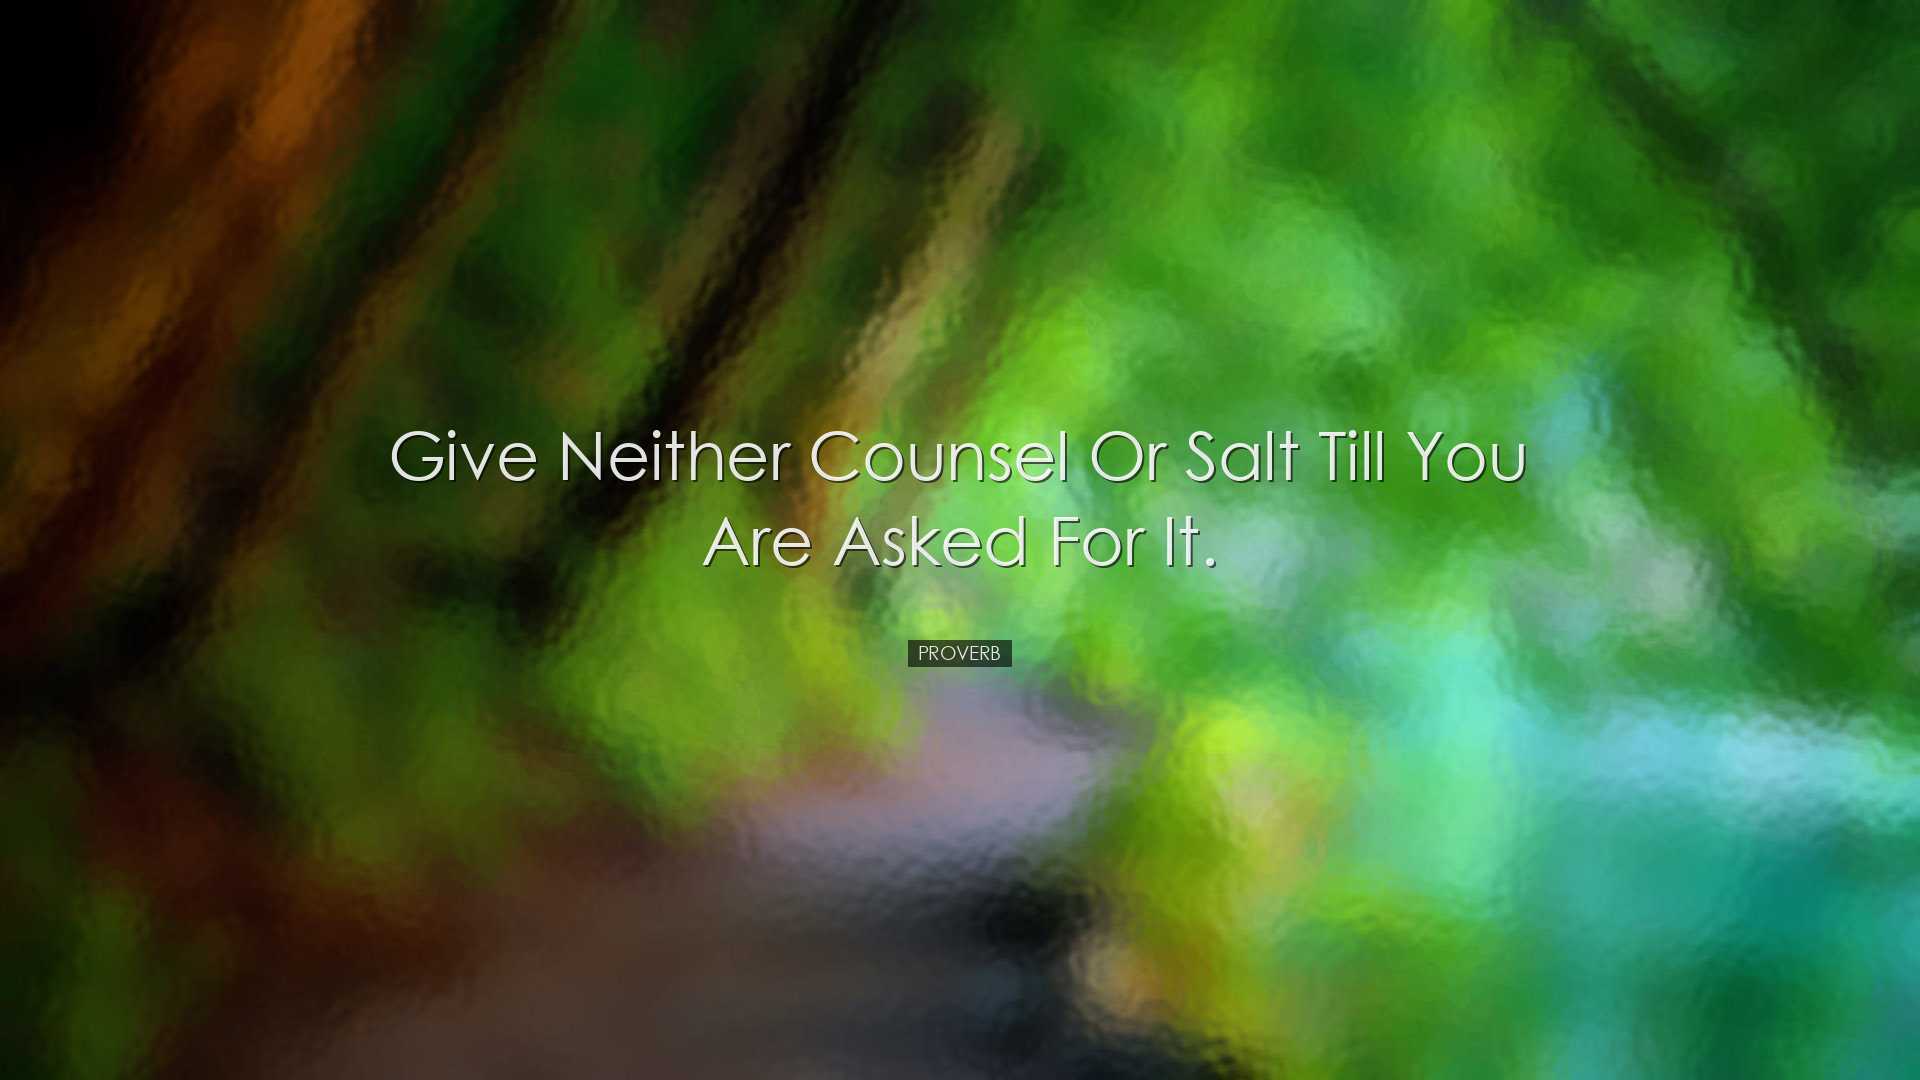 Give neither counsel or salt till you are asked for it. - Proverb